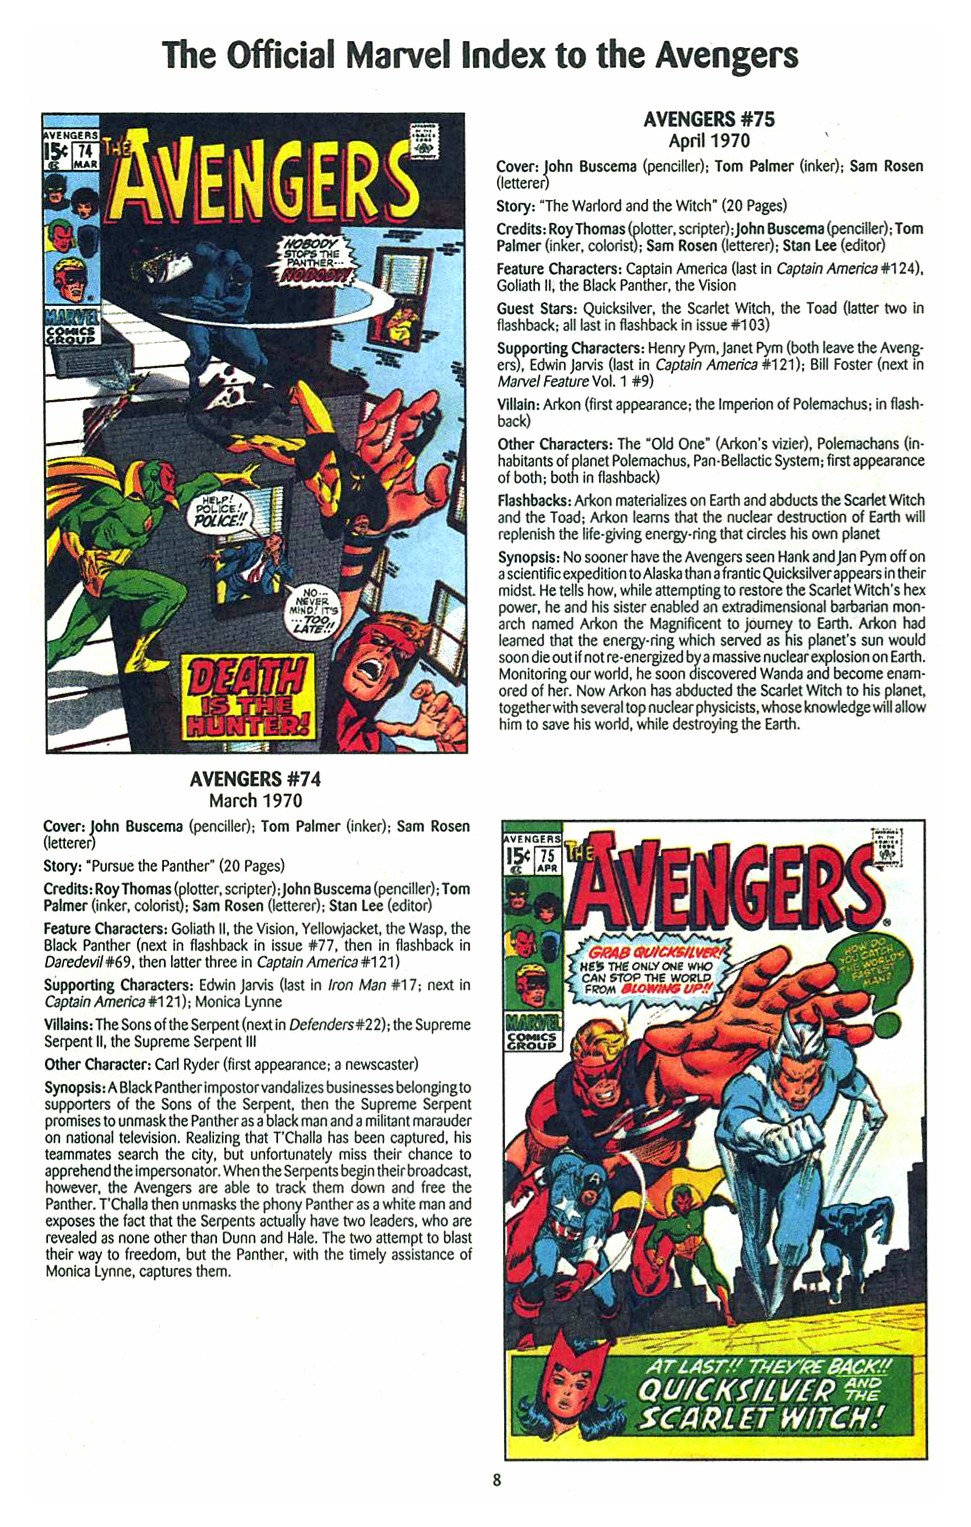 Read online The Official Marvel Index to the Avengers comic -  Issue #2 - 10